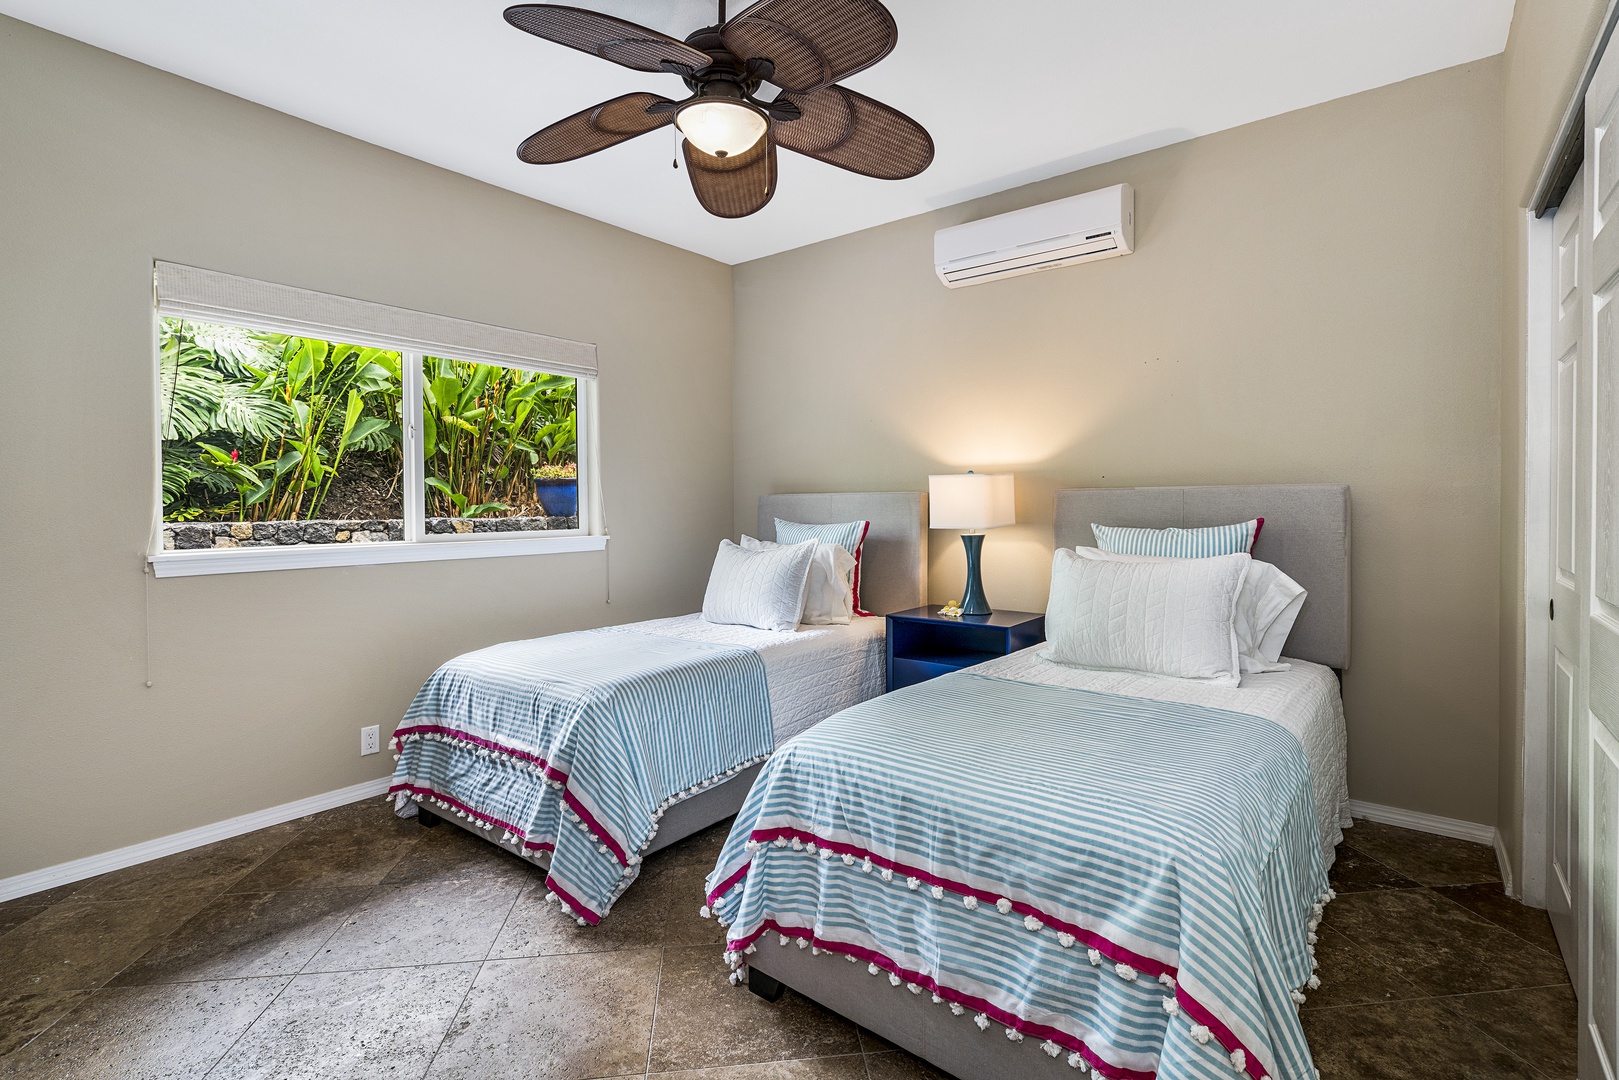 Kailua Kona Vacation Rentals, Sunset Hale - Guest bedroom offering 2 Twin beds & A/C